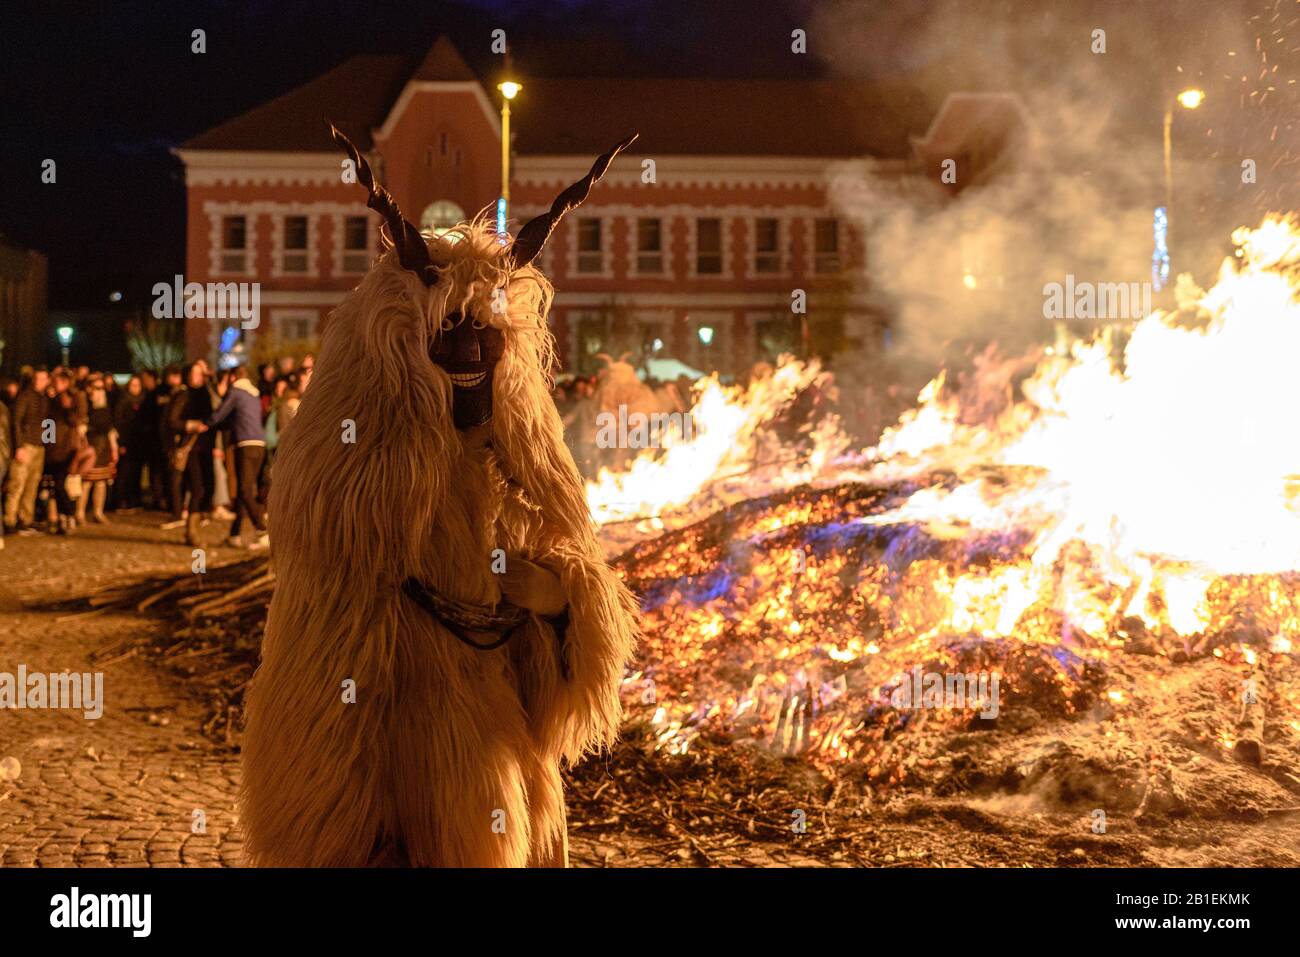 A masked buso standing by the Sunday evening bonfire at the 2020 Busojaras carnival celebration in Mohacs, Hungary Stock Photo